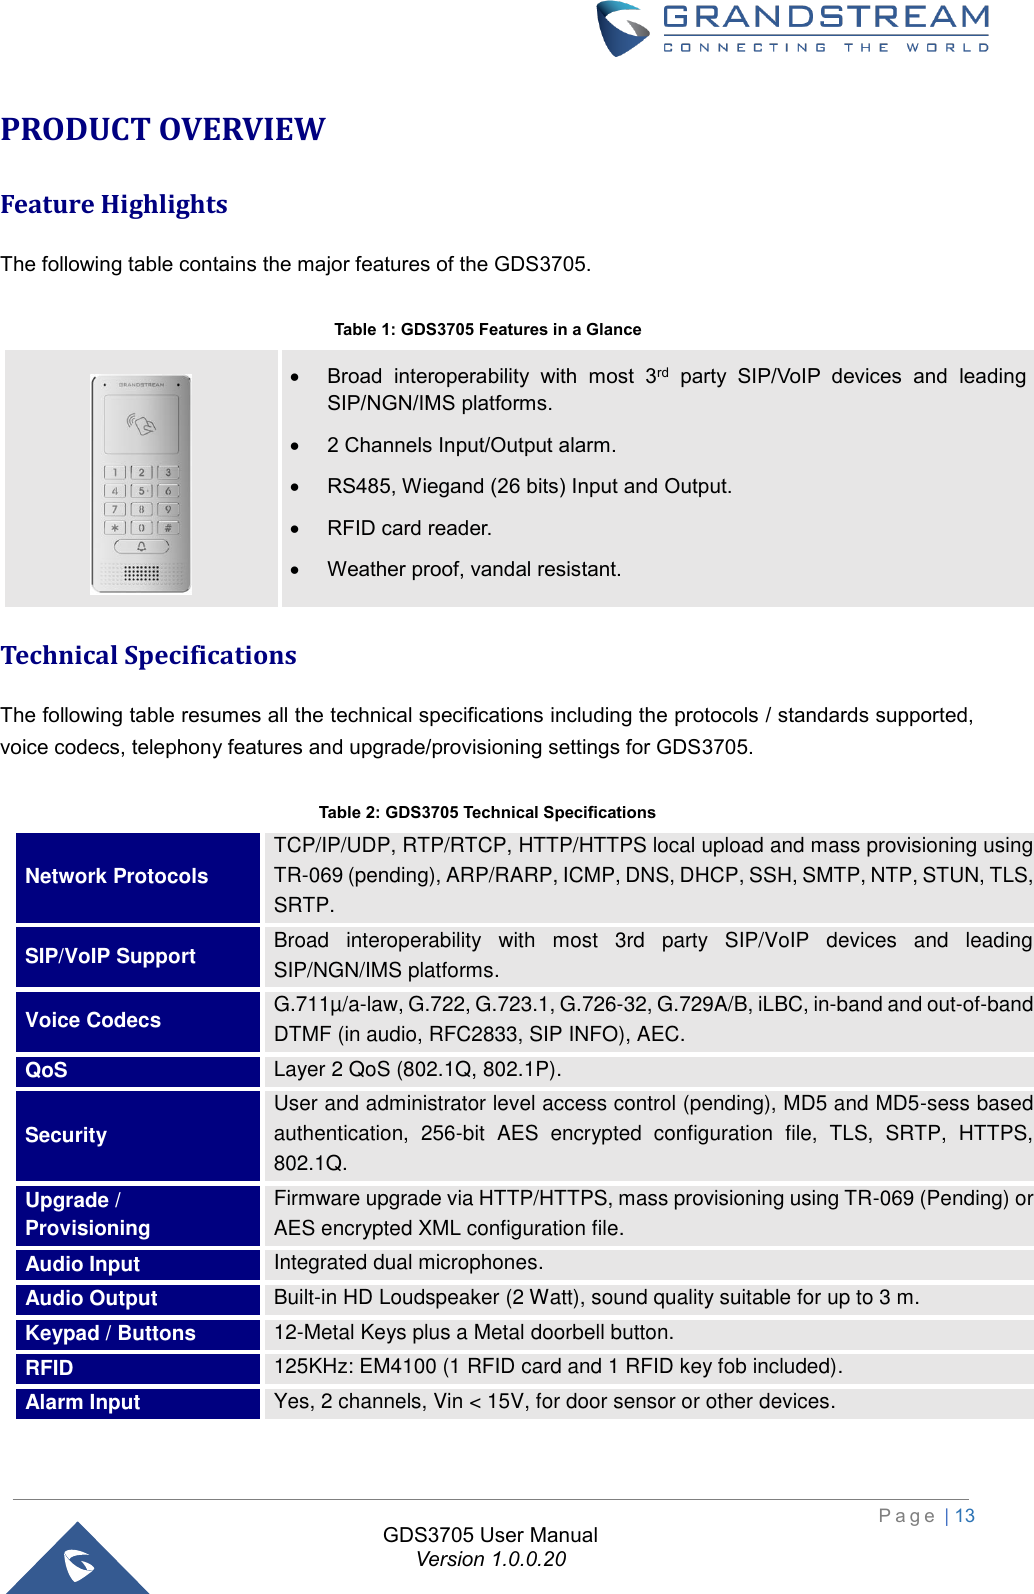                                                                         P a g e  | 13  GDS3705 User Manual Version 1.0.0.20 PRODUCT OVERVIEW  Feature Highlights The following table contains the major features of the GDS3705.  Table 1: GDS3705 Features in a Glance  • Broad  interoperability  with  most  3rd  party  SIP/VoIP  devices  and  leading SIP/NGN/IMS platforms. • 2 Channels Input/Output alarm. • RS485, Wiegand (26 bits) Input and Output. • RFID card reader. • Weather proof, vandal resistant. Technical Specifications The following table resumes all the technical specifications including the protocols / standards supported, voice codecs, telephony features and upgrade/provisioning settings for GDS3705.  Table 2: GDS3705 Technical Specifications Network Protocols  TCP/IP/UDP, RTP/RTCP, HTTP/HTTPS local upload and mass provisioning using TR-069 (pending), ARP/RARP, ICMP, DNS, DHCP, SSH, SMTP, NTP, STUN, TLS, SRTP. SIP/VoIP Support Broad  interoperability  with  most  3rd  party  SIP/VoIP  devices  and  leading SIP/NGN/IMS platforms. Voice Codecs G.711µ/a-law, G.722, G.723.1, G.726-32, G.729A/B, iLBC, in-band and out-of-band DTMF (in audio, RFC2833, SIP INFO), AEC. QoS Layer 2 QoS (802.1Q, 802.1P). Security User and administrator level access control (pending), MD5 and MD5-sess based authentication,  256-bit  AES  encrypted  configuration  file,  TLS,  SRTP,  HTTPS, 802.1Q. Upgrade / Provisioning Firmware upgrade via HTTP/HTTPS, mass provisioning using TR-069 (Pending) or AES encrypted XML configuration file. Audio Input  Integrated dual microphones. Audio Output  Built-in HD Loudspeaker (2 Watt), sound quality suitable for up to 3 m. Keypad / Buttons 12-Metal Keys plus a Metal doorbell button. RFID 125KHz: EM4100 (1 RFID card and 1 RFID key fob included). Alarm Input Yes, 2 channels, Vin &lt; 15V, for door sensor or other devices. 